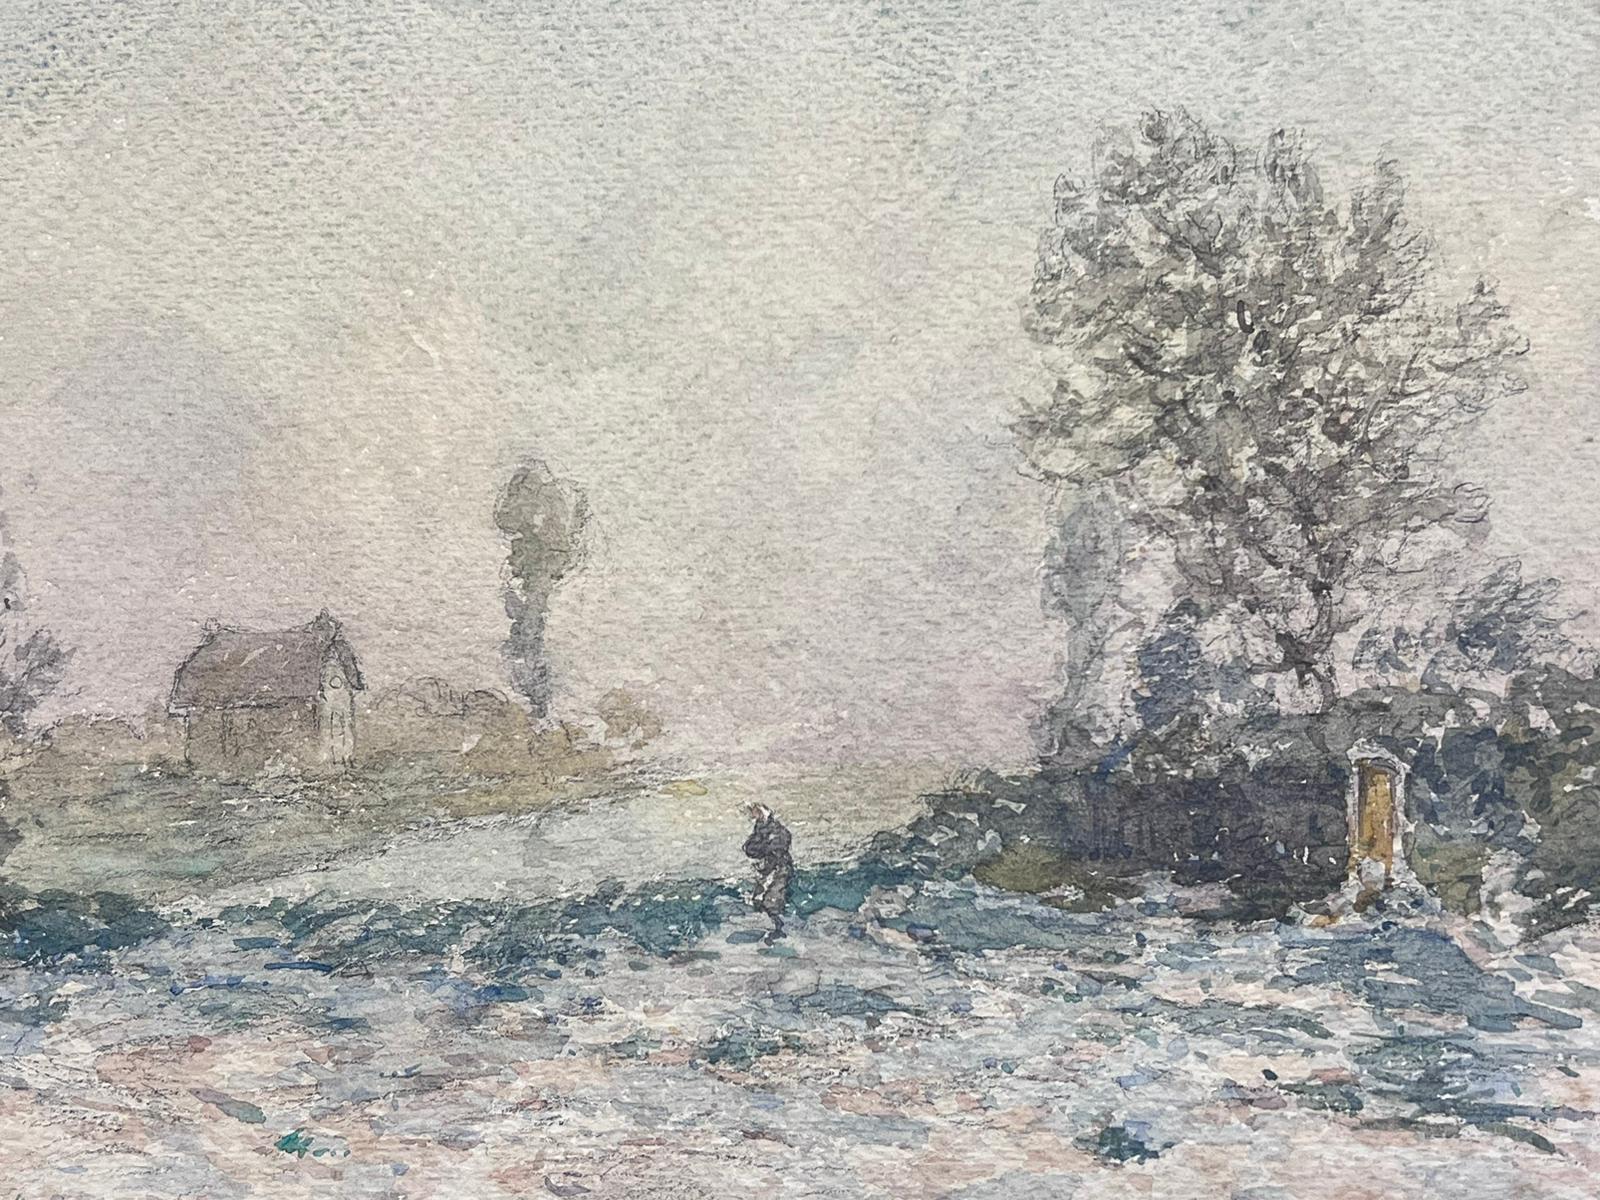 The artist: 
Henri Aime Duhem (1860-1941) French *see notes below, signed 

Title: Winter

Medium:  
signed gouache on paper, loosely laid over card, unframed

card: 10 x 13 inches
painting: 9.25 x 12 inches

Provenance: 
private collection of this